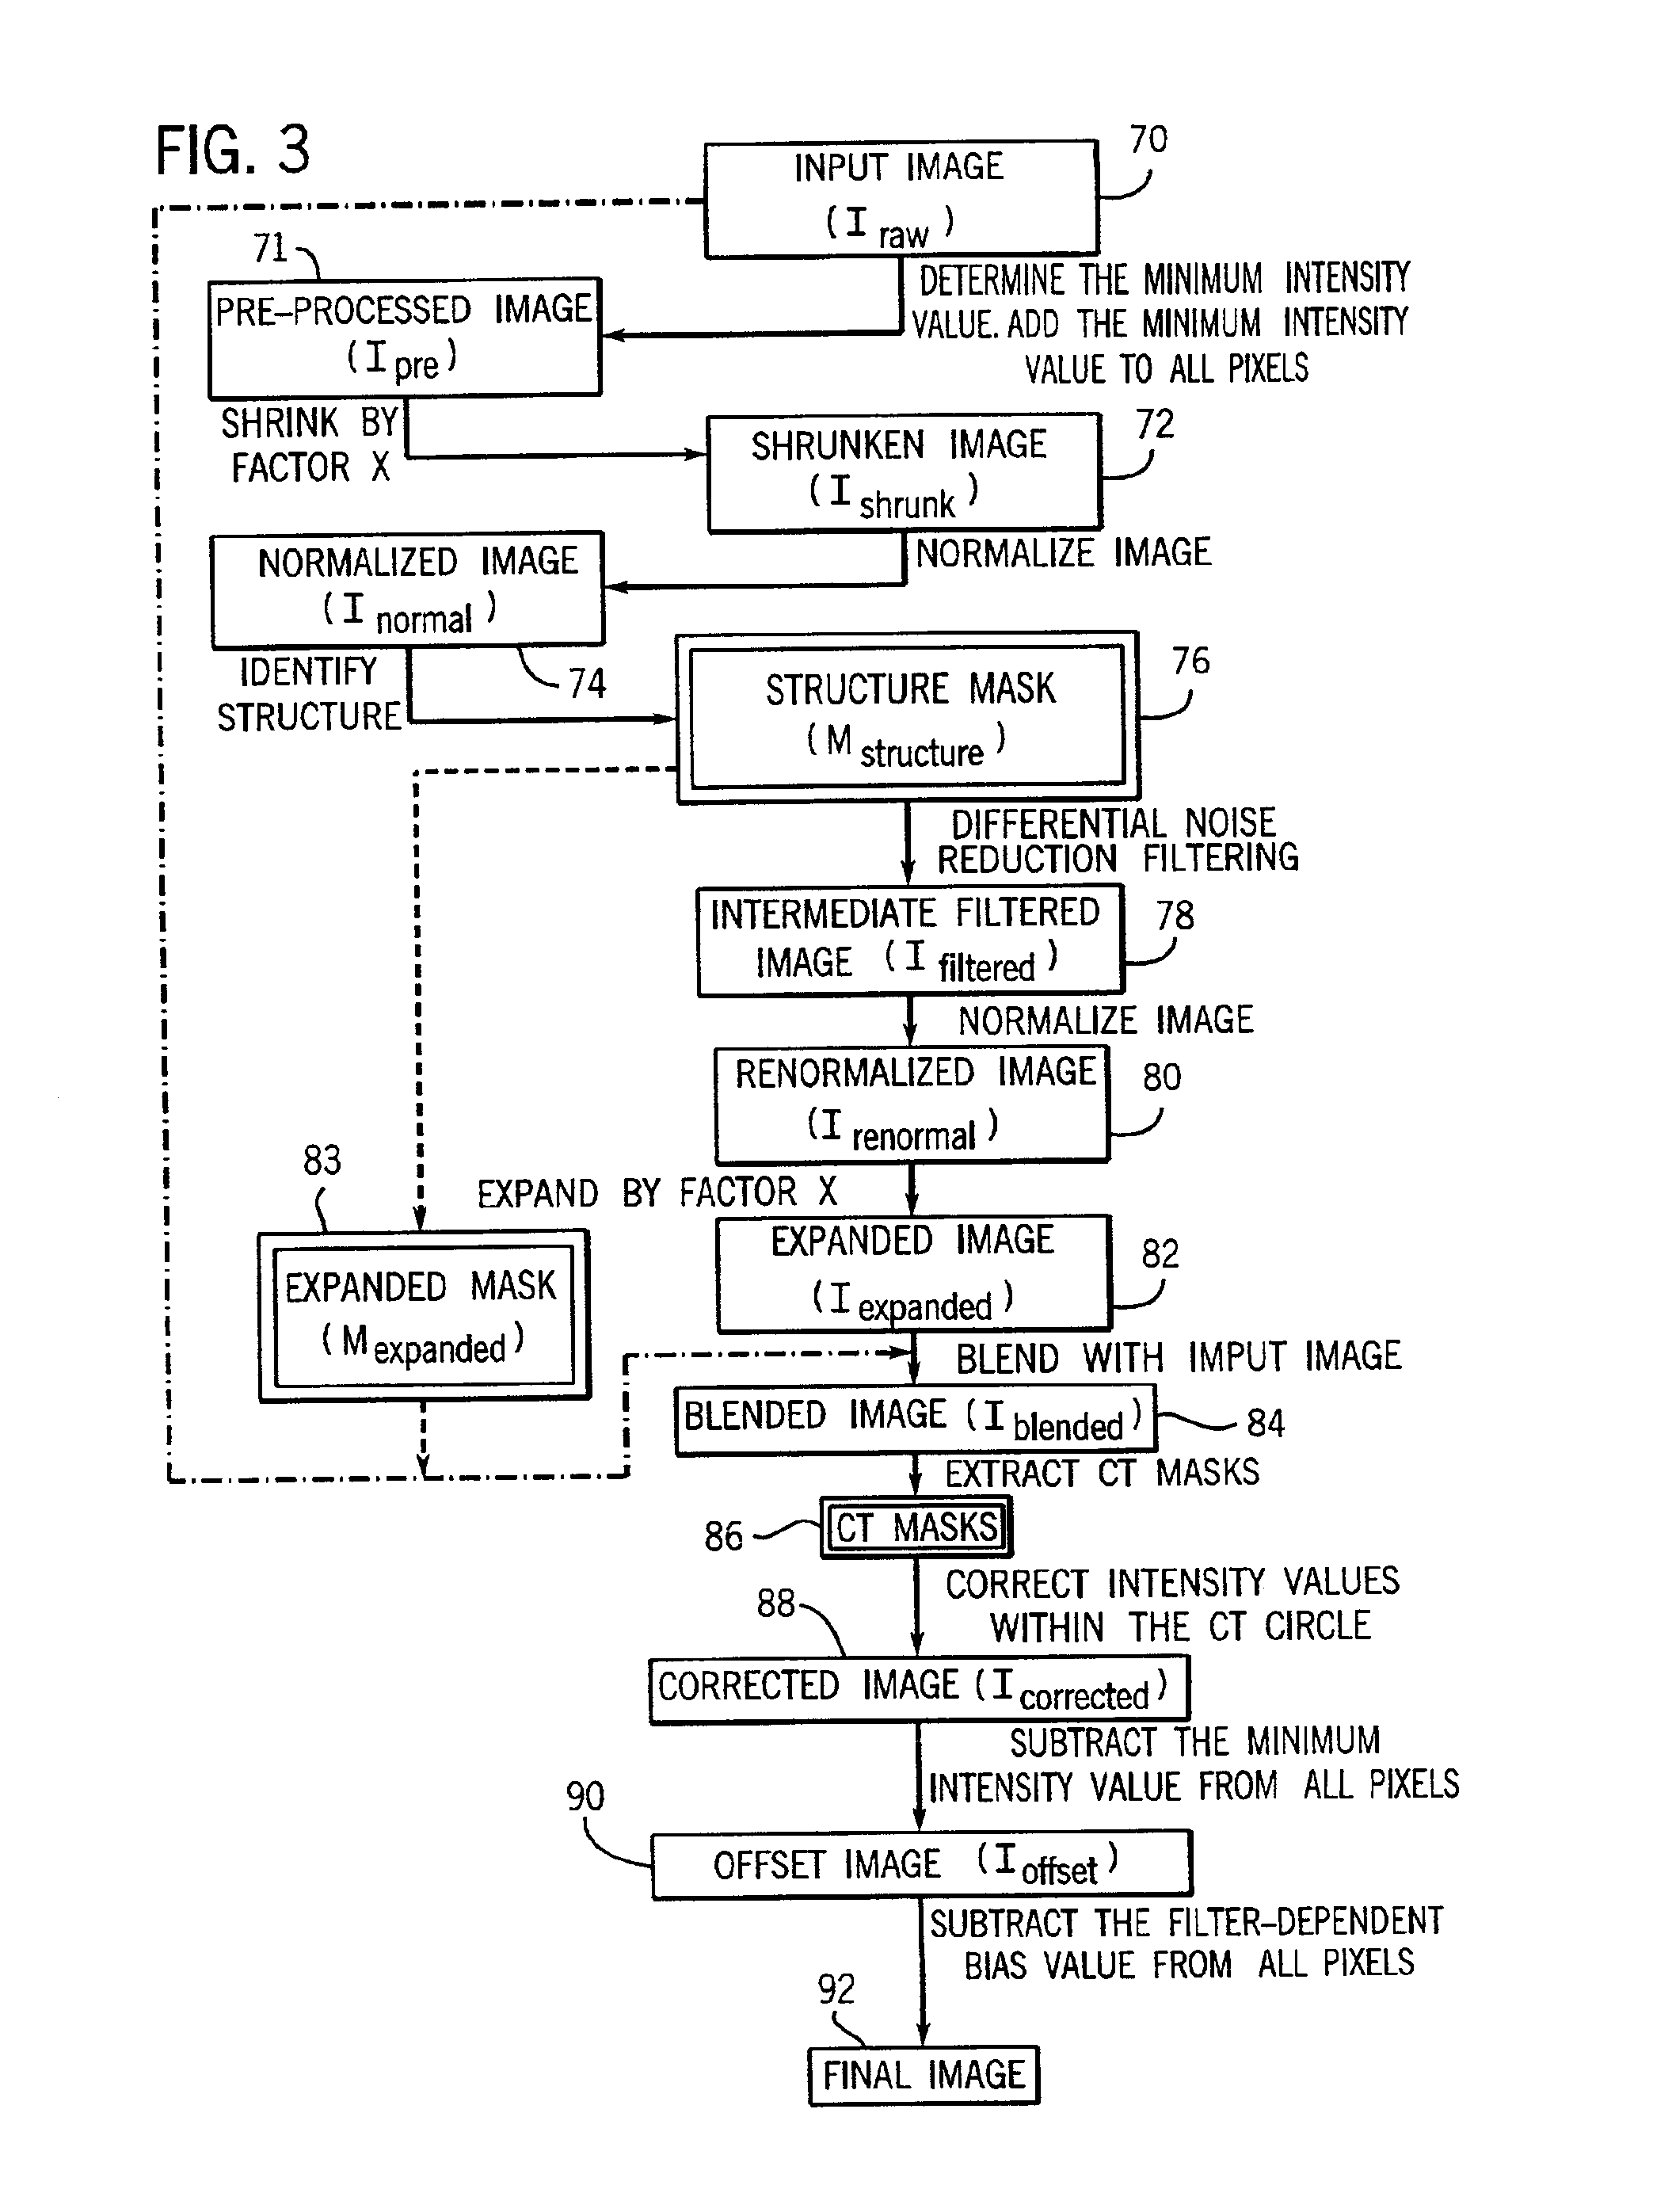 CT dose reduction filter with a computationally efficient implementation